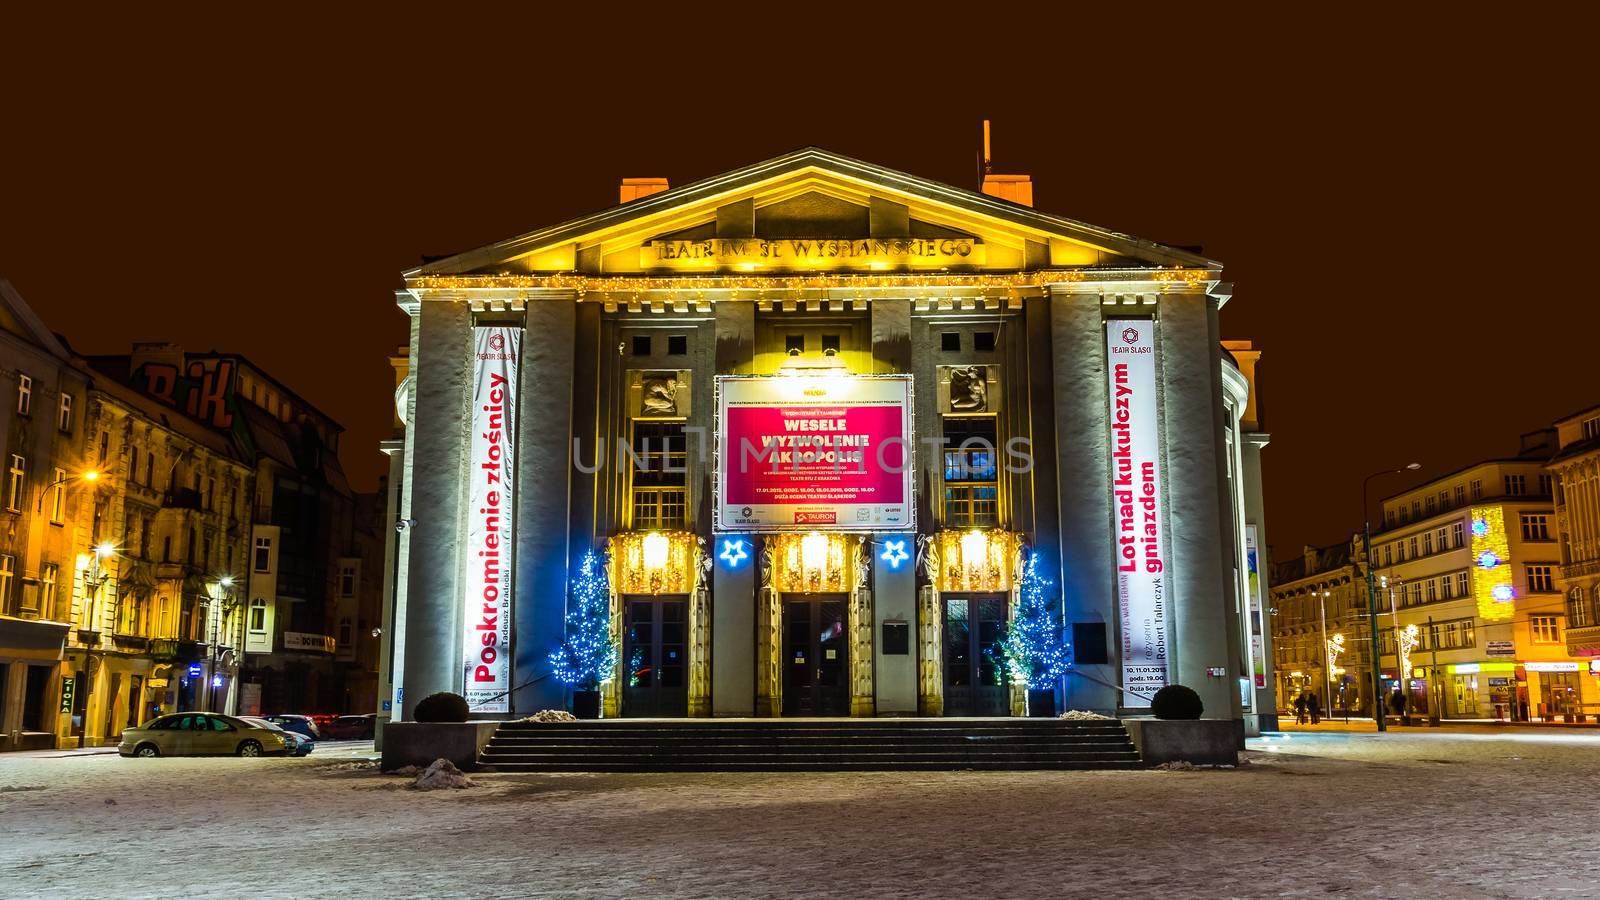 Stanislaw Wyspianski Silesian Theatre in Katowice, the largest scene in Silesia. Built as "German Theatre" in the years of 1905-1907, designed by German architect Carl Moritz.